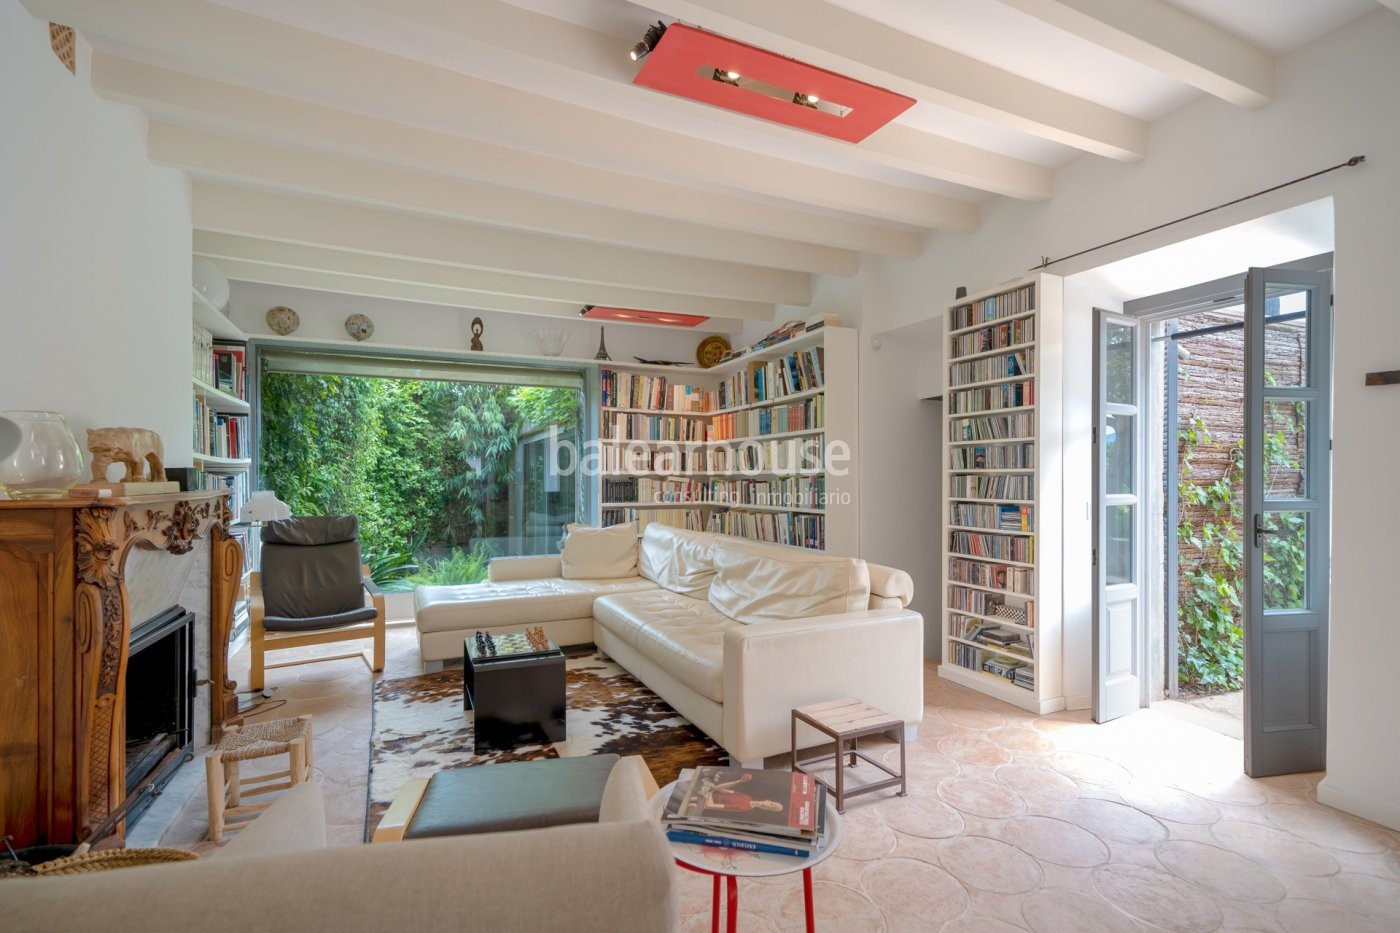 Tradition, modernity and nature in this large estate at a short distance from the centre of Palma.